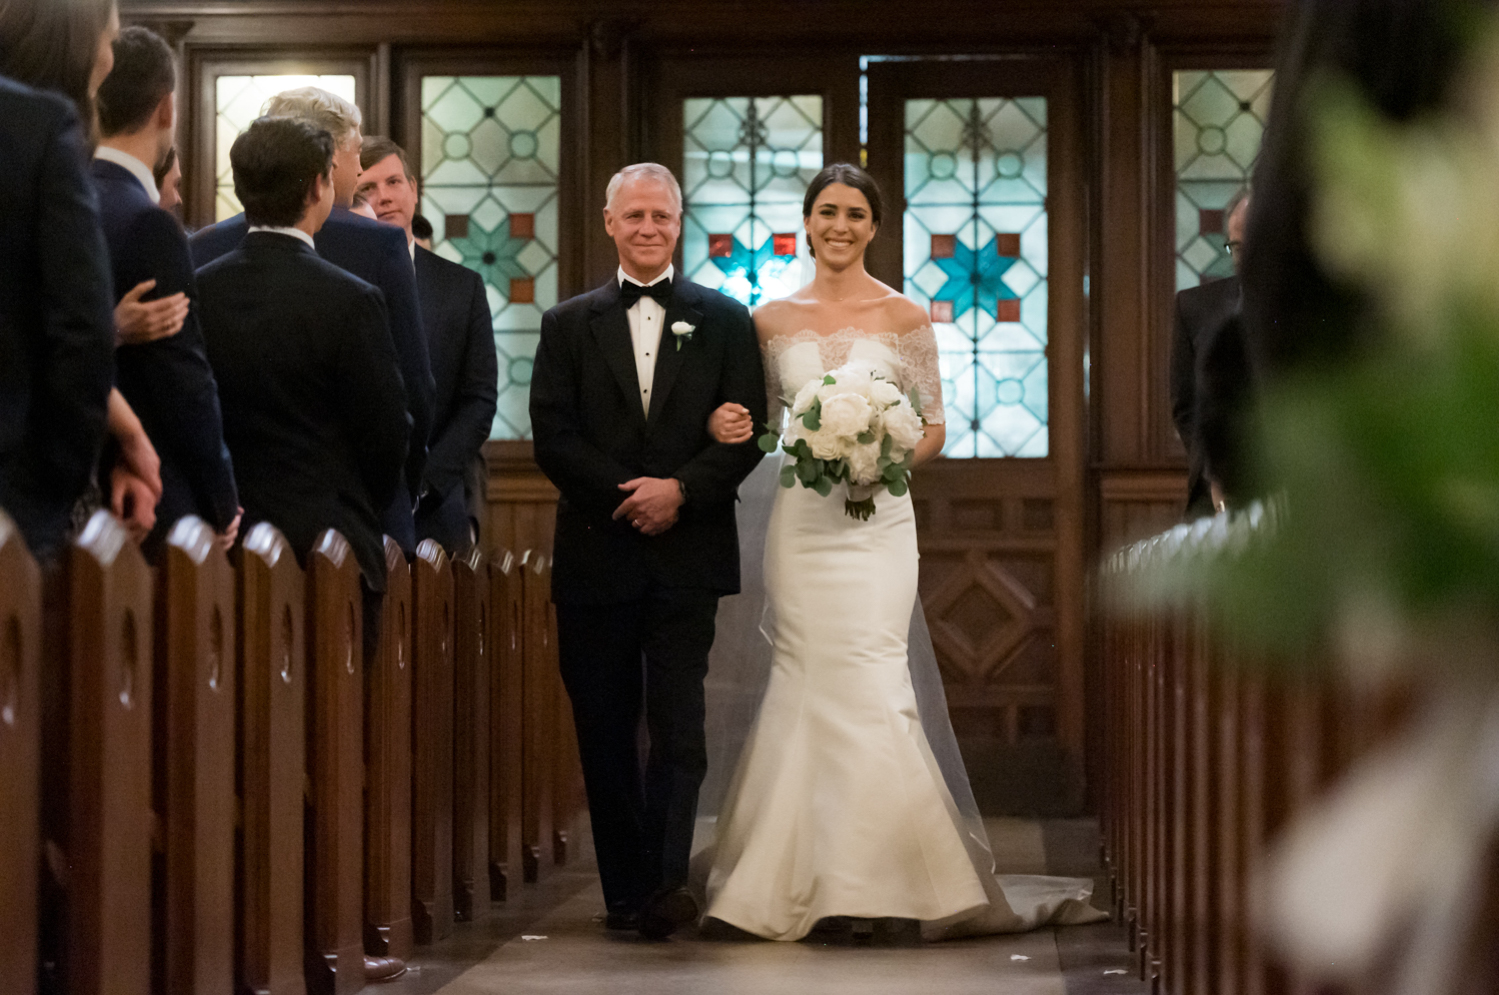 The bride walks down the aisle with her father, smiling at their guests.